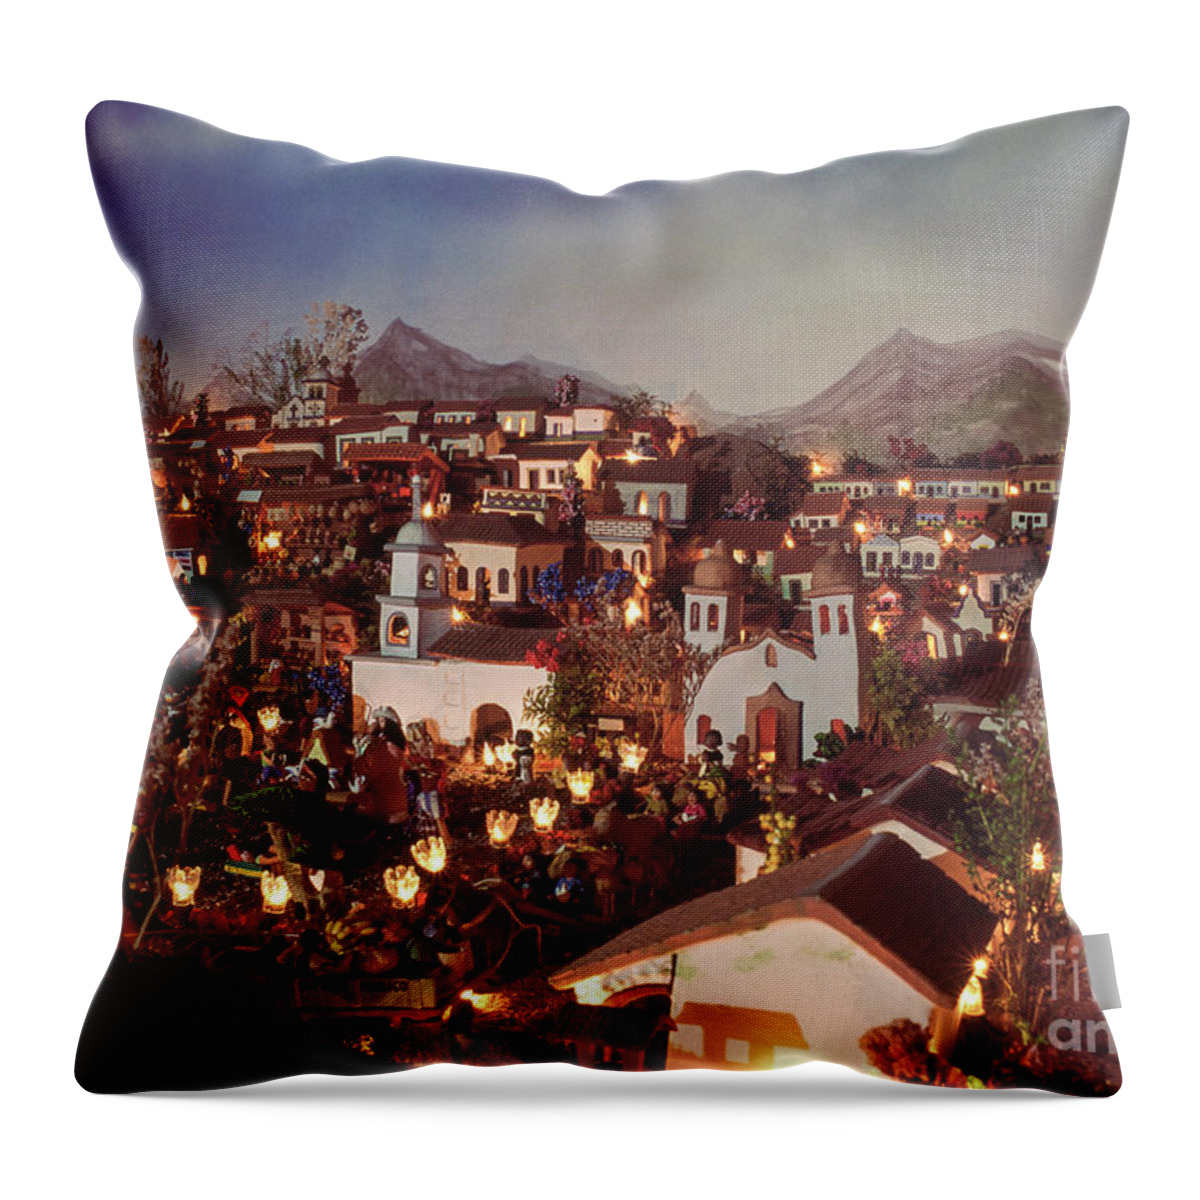 Architecture Throw Pillow featuring the photograph Dtl-11803 by Juan Silva